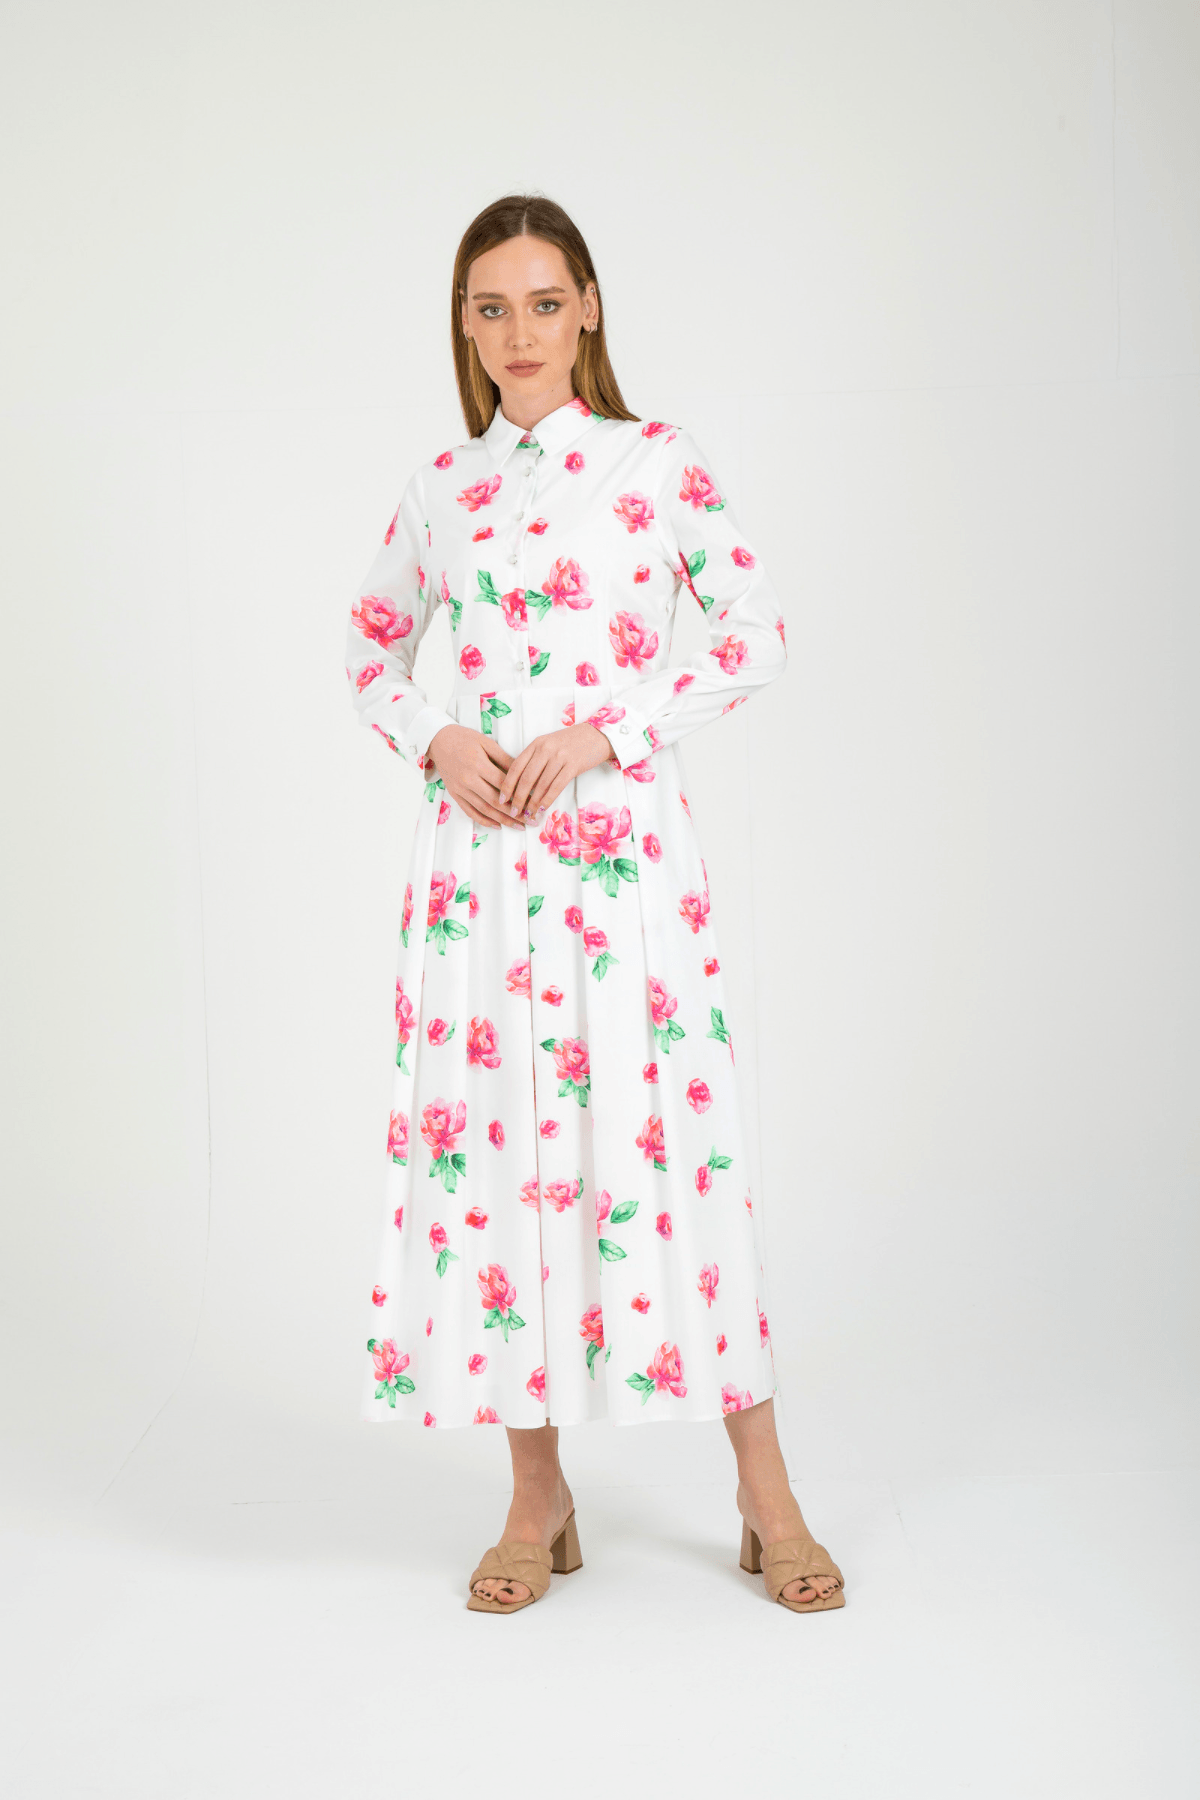 Rose dress is the perfect choice for an elegant night out Dress By Baano   